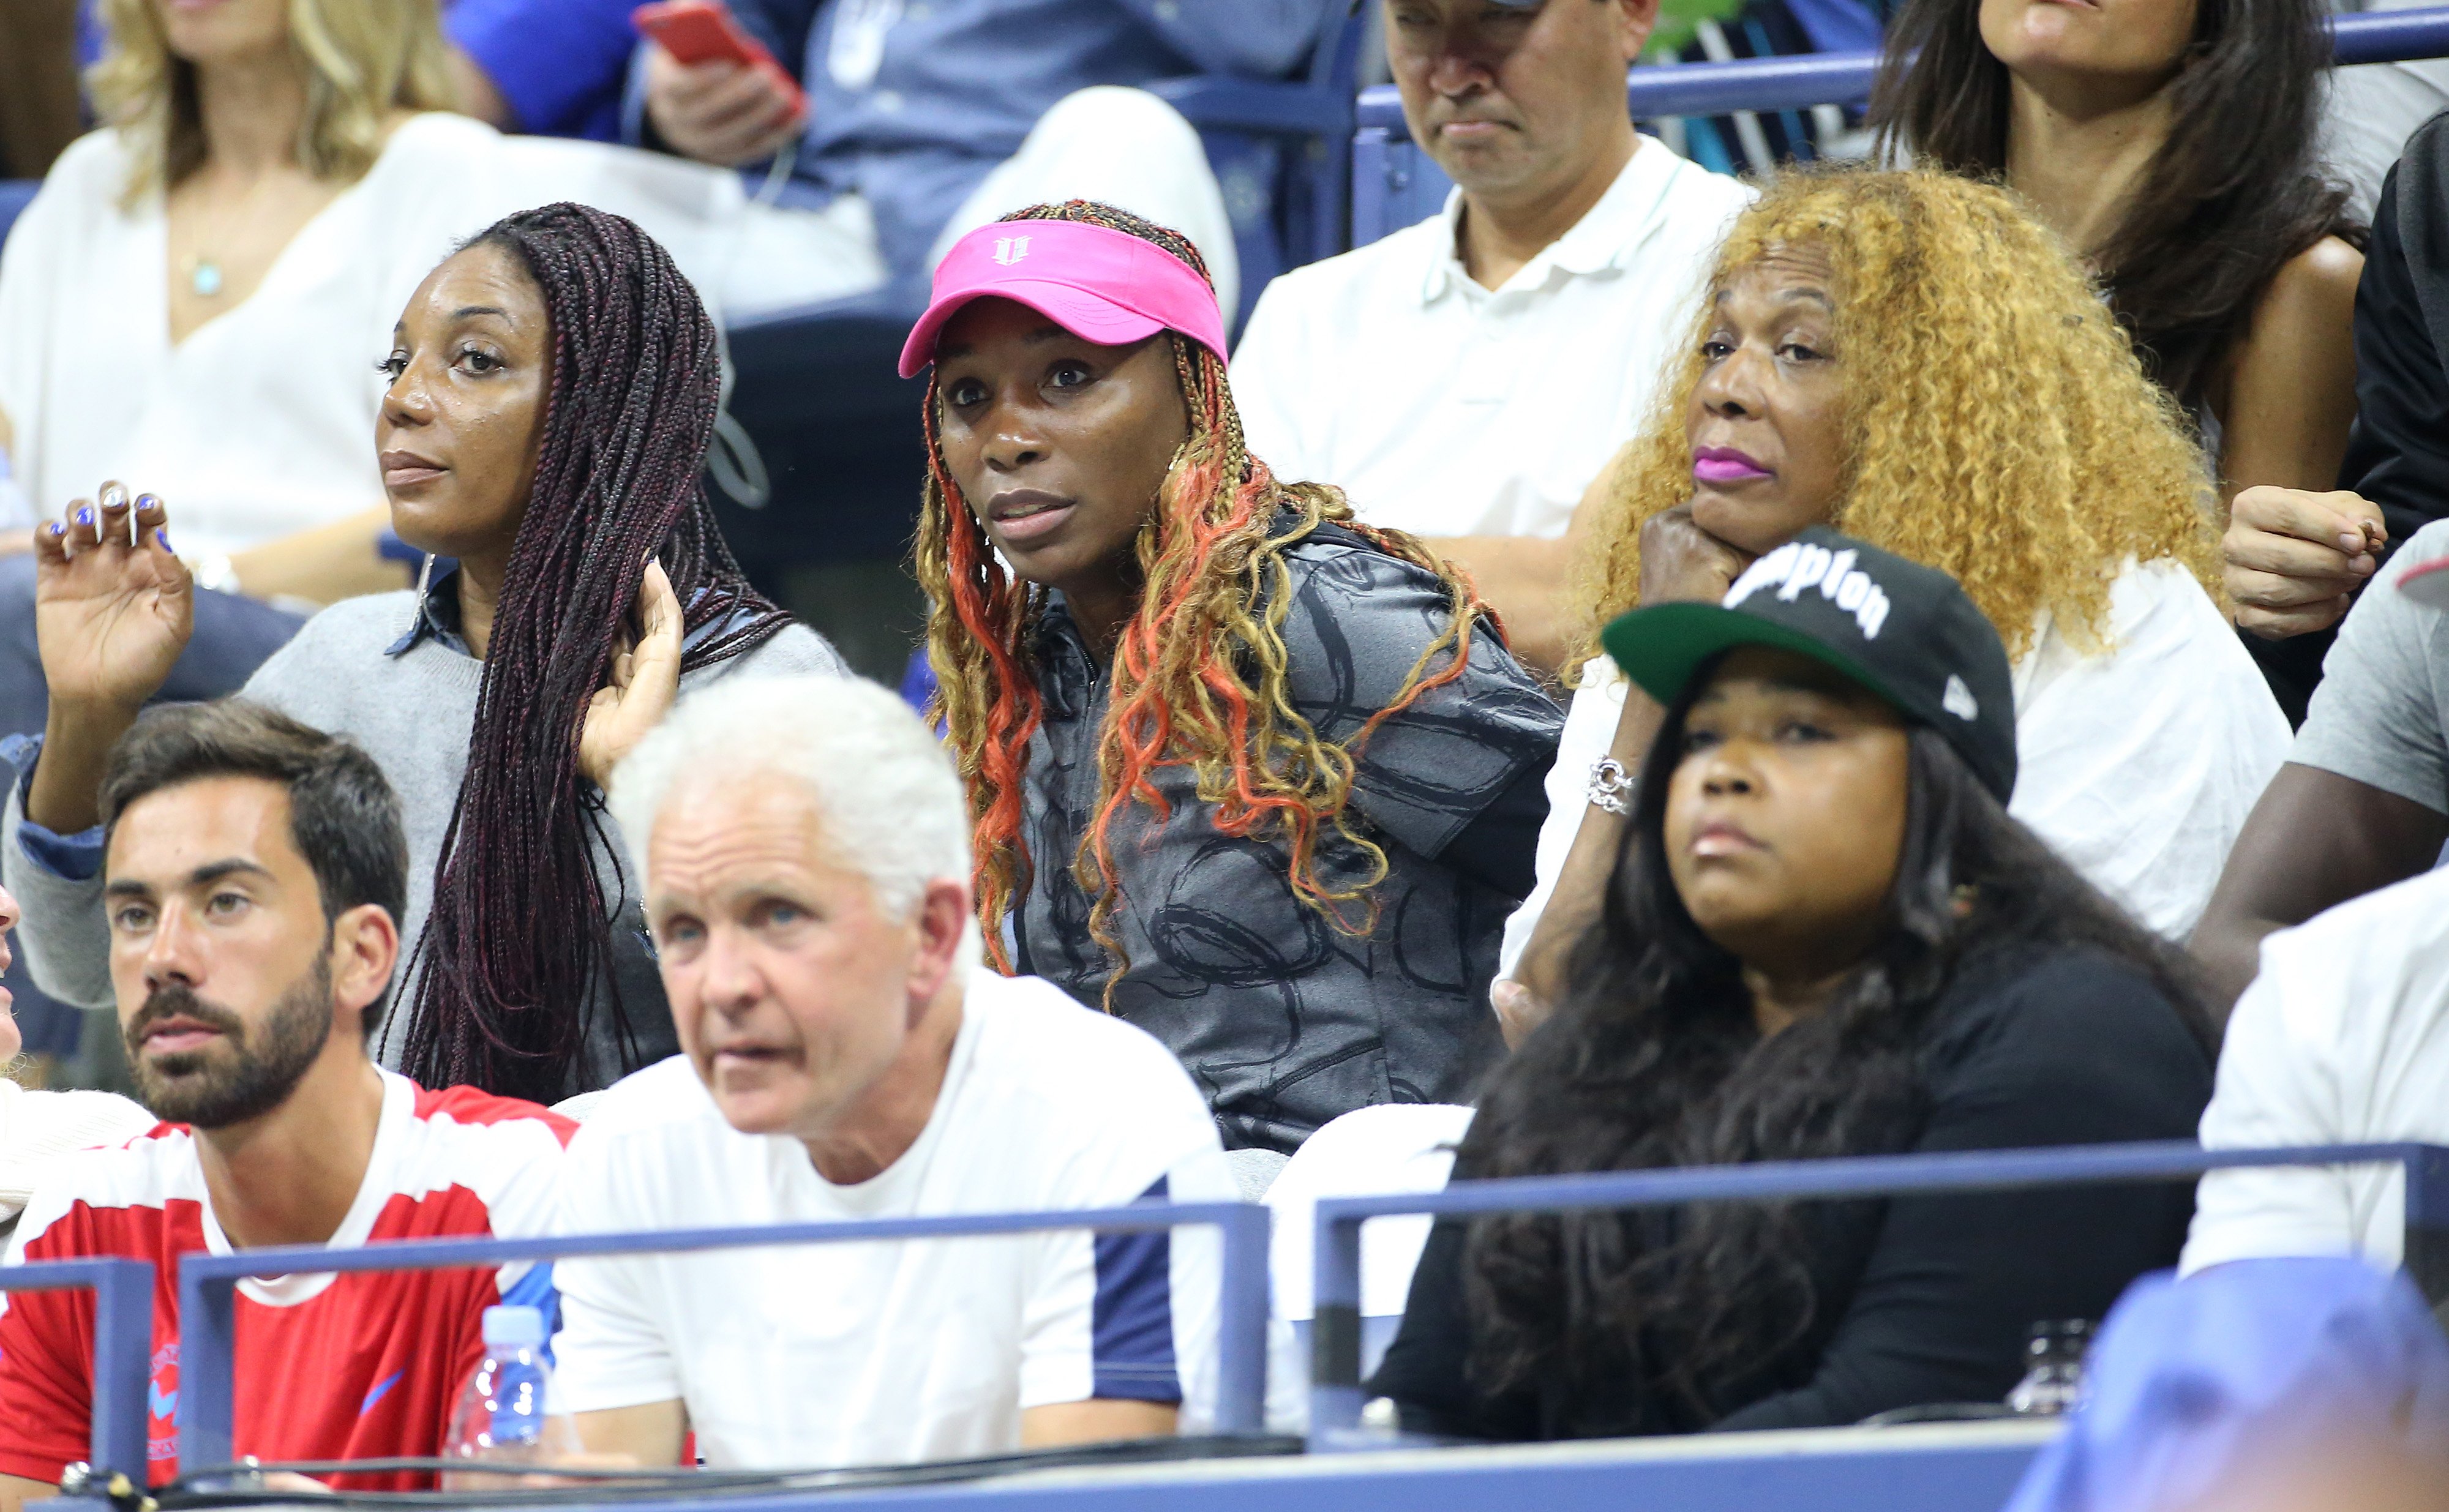 Venus Williams attends Serena's semifinal between her sisters Lyndrea Price (left), Isha Price (bottom) and their mother Oracene Price during day 11 of the 2016 US Open at USTA Billie Jean King National Tennis Center on September 8, 2016 in the Queens borough of New York City. | Source: Getty Images